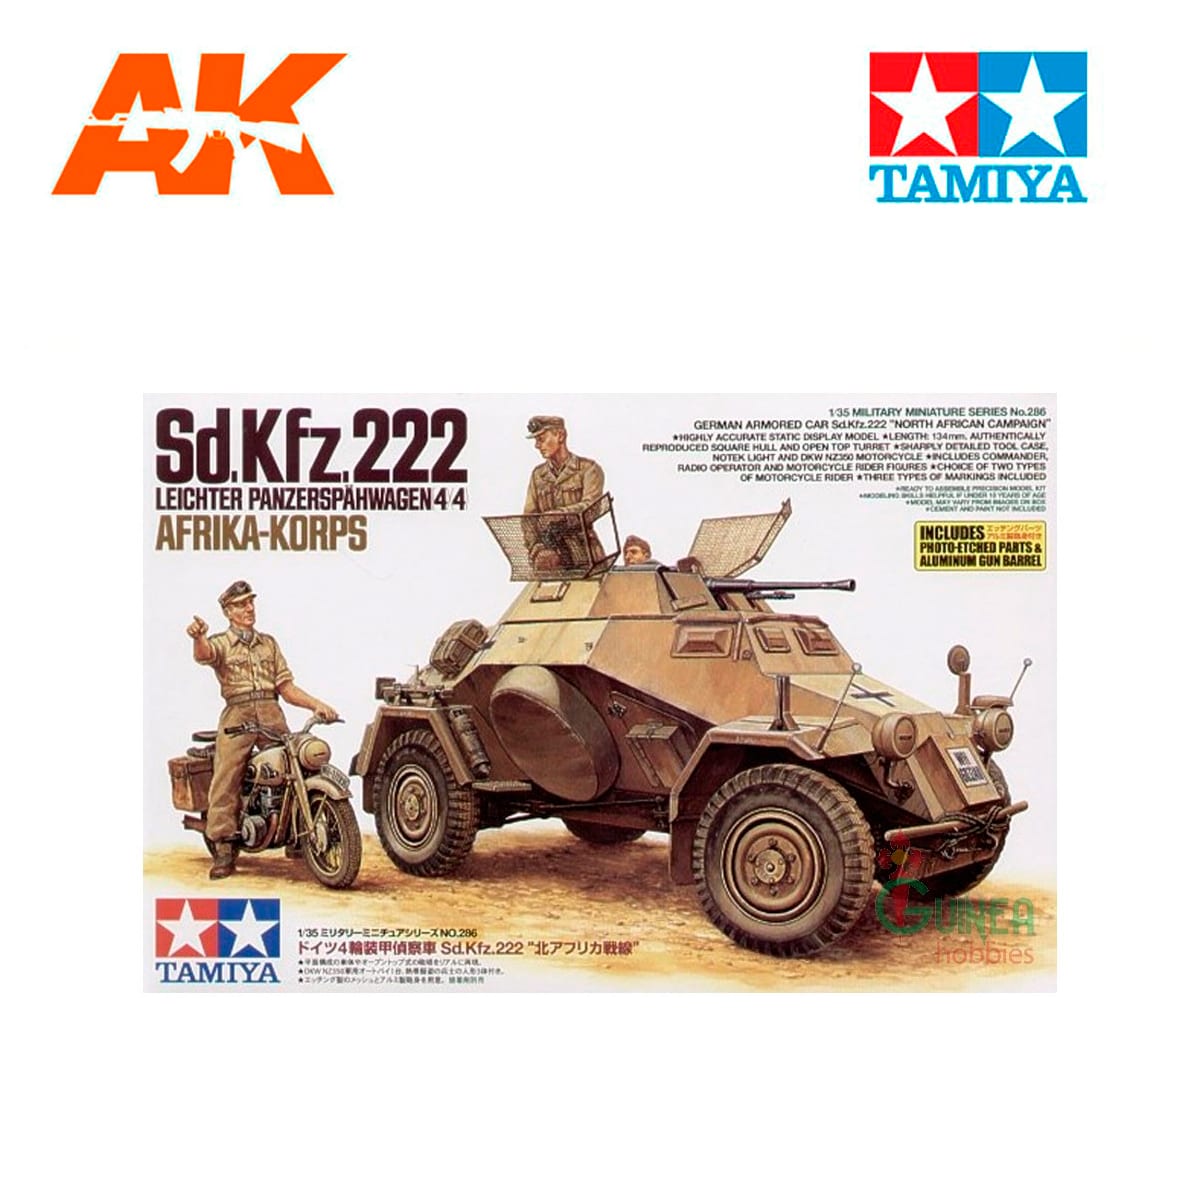 1/35 German Armored CAr Sd.Kfz.222 North African Campaign